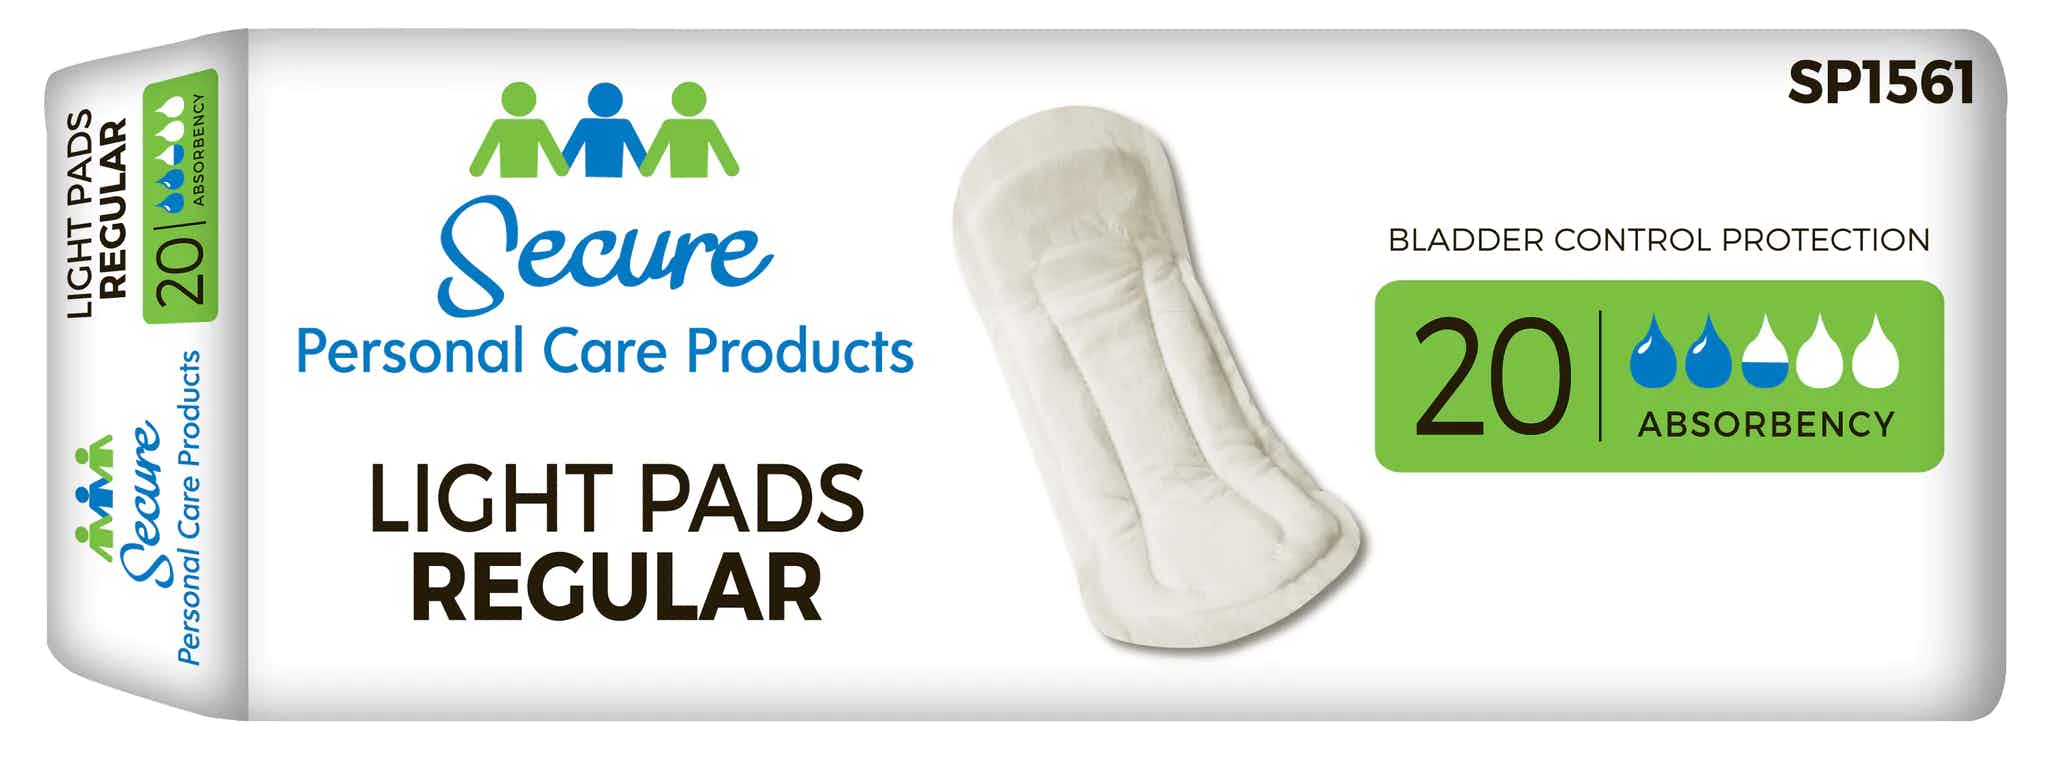 Secure Personal Care Products Women's Bladder Control Light Pads Regular, SP1561, 11" - Case of 180 (9 Bags)